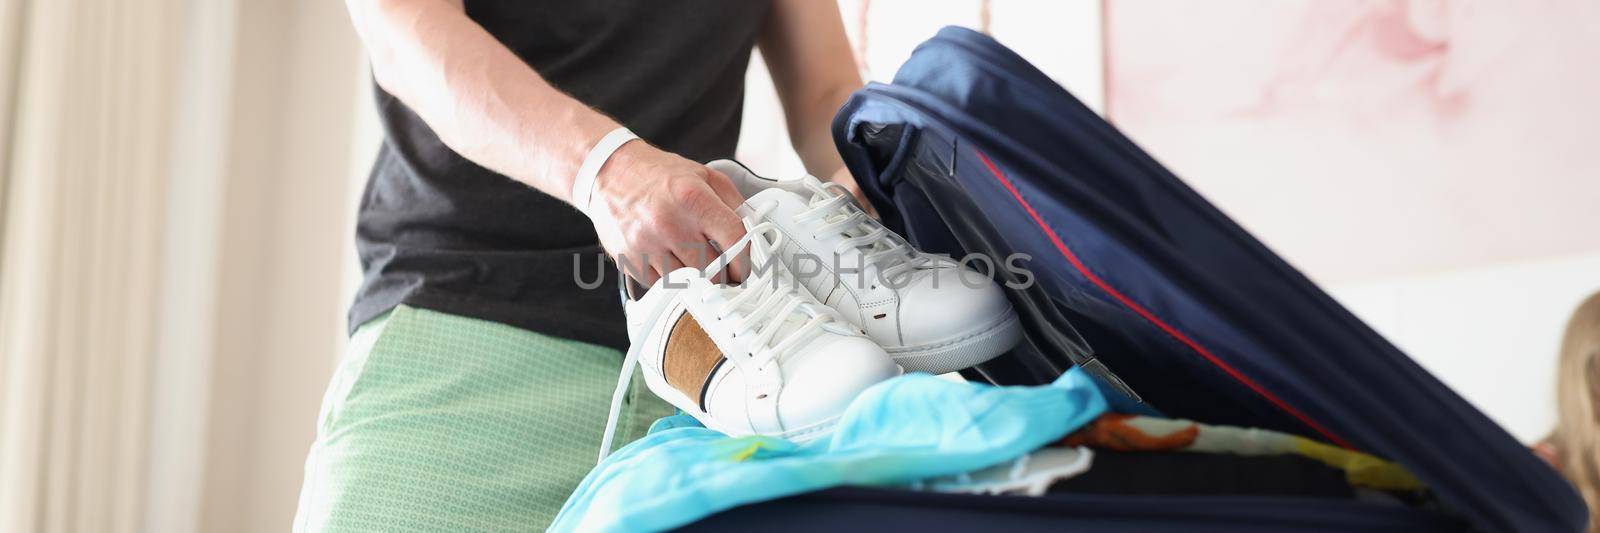 Portrait of man packing clothes into travel bag, putting pair of white sneakers into suitcase. Get ready for travel fast. Moving, traveling, business trip, relocation concept